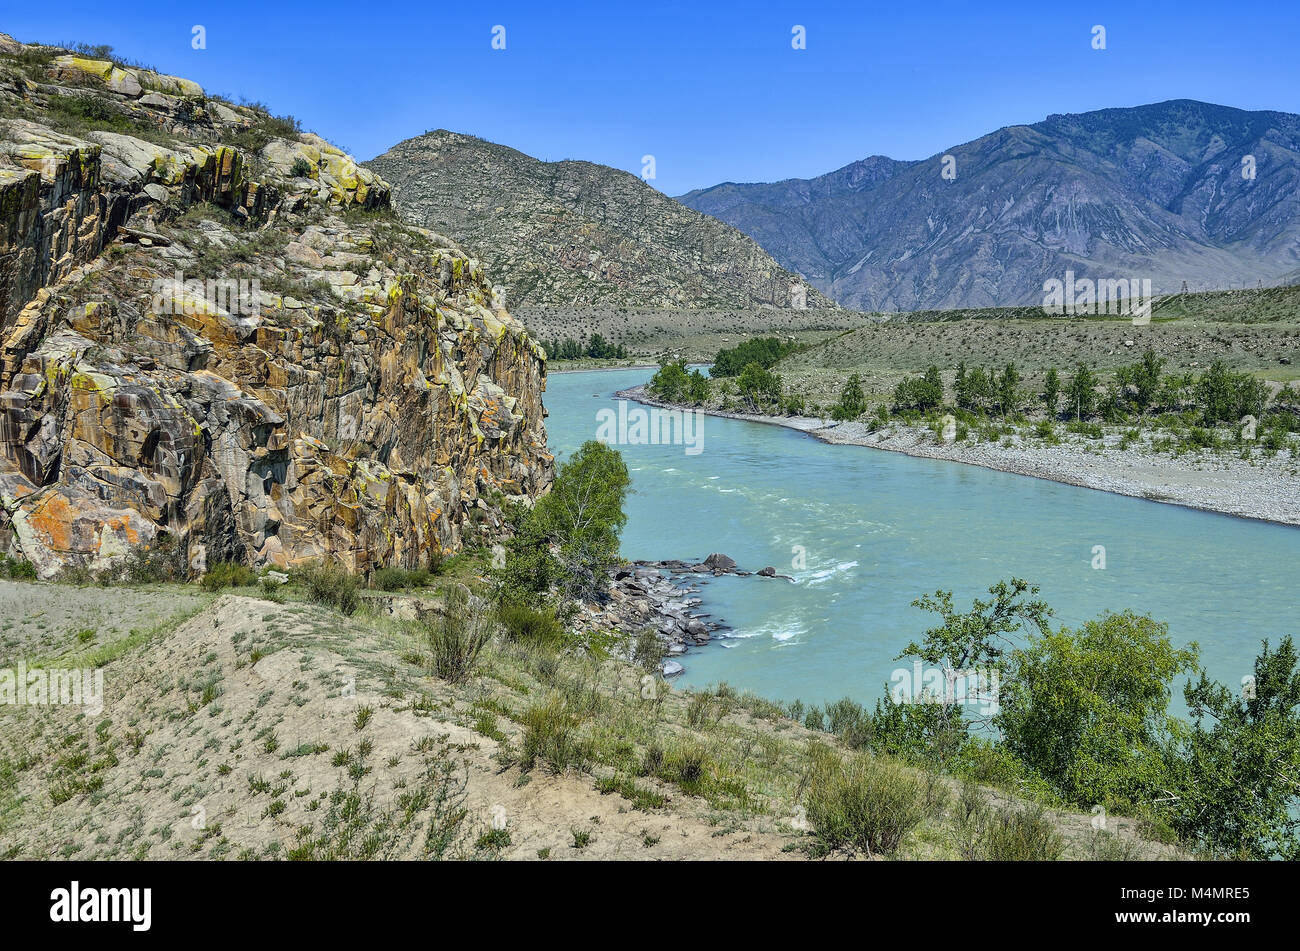 Summer mountain landscape with turquoise river and colorful rocks Stock Photo